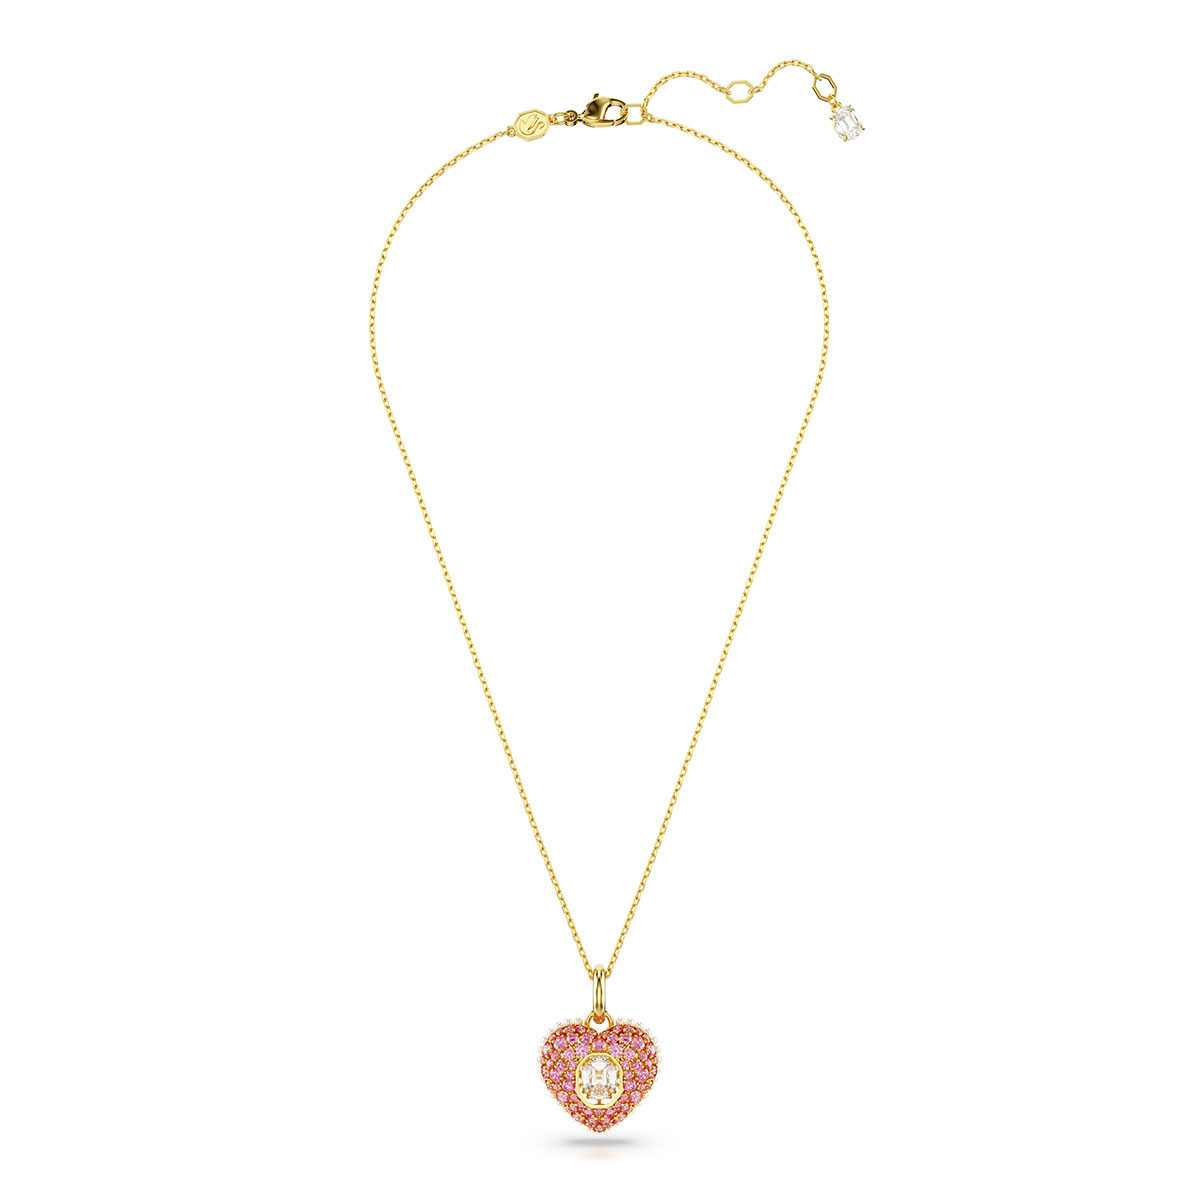 Swarovski Octagon Pink Crystal, Pearls and Gold-Tone Plated Heart Hyperbola Pendant Necklace,